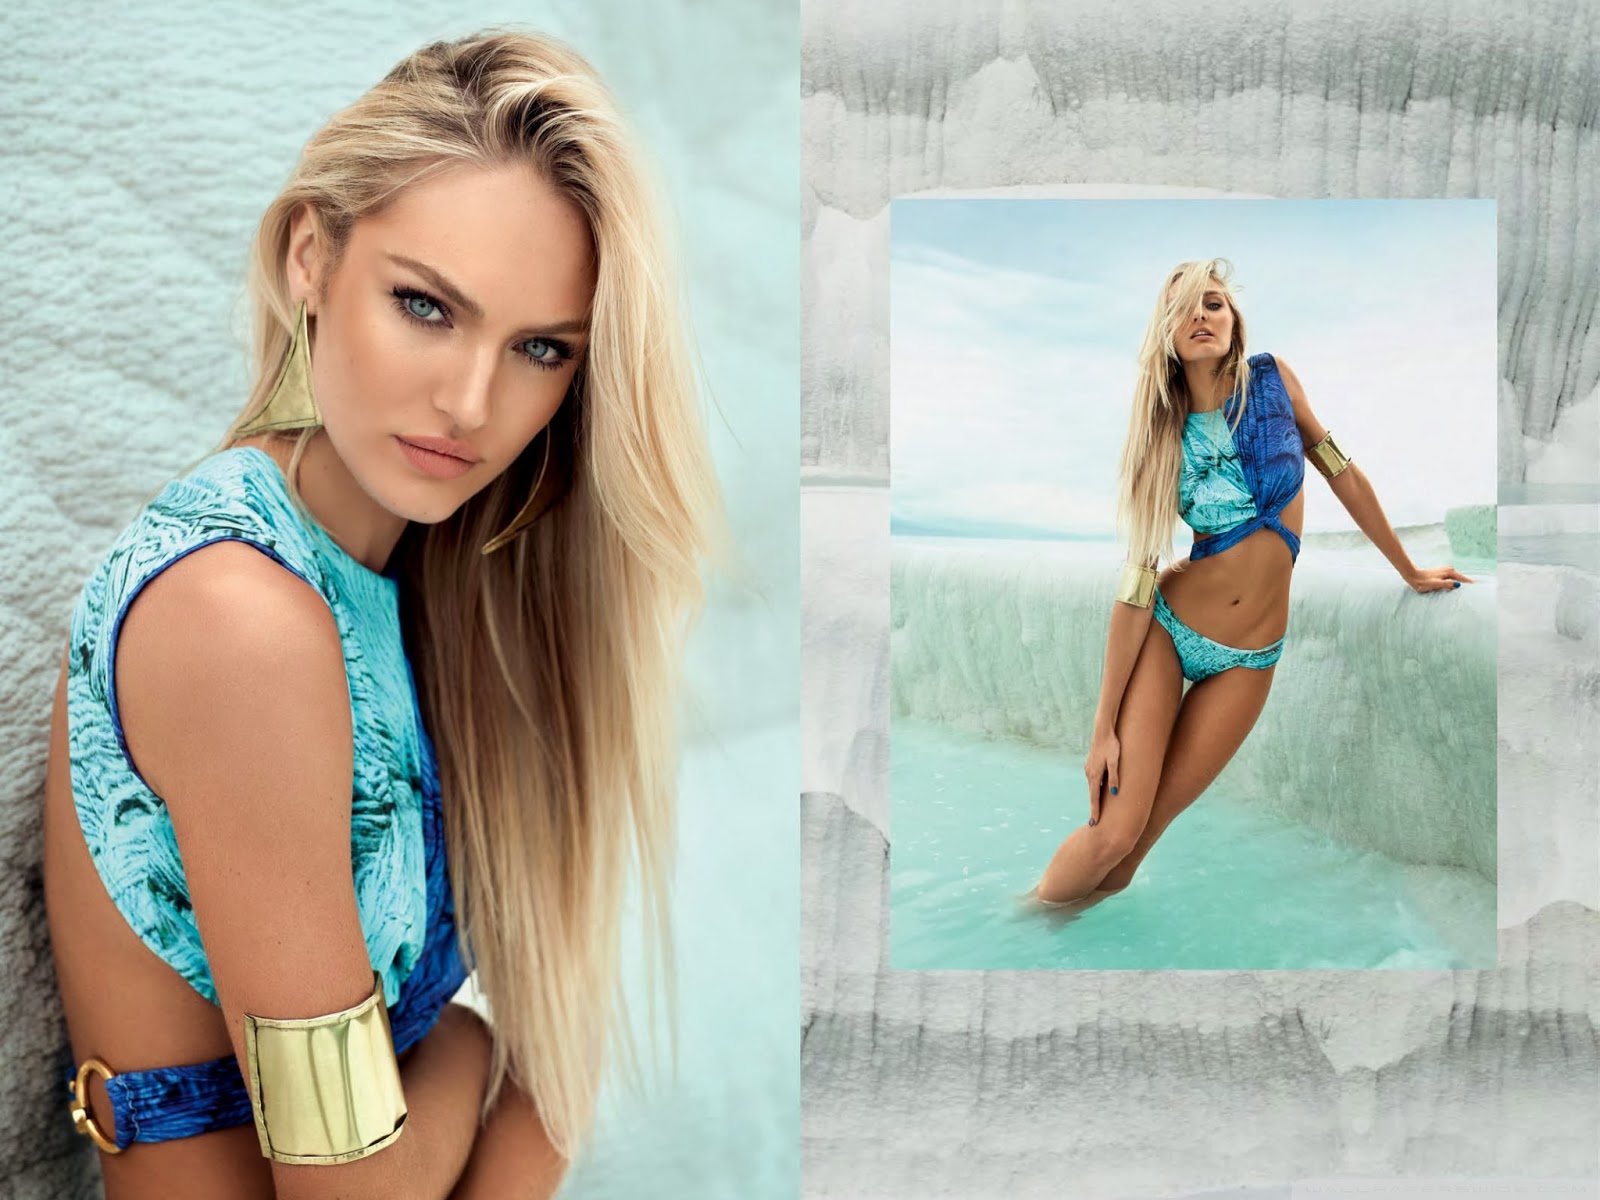 Candice Swanepoel Hd Wallpapers Hd Wallpapers Blog